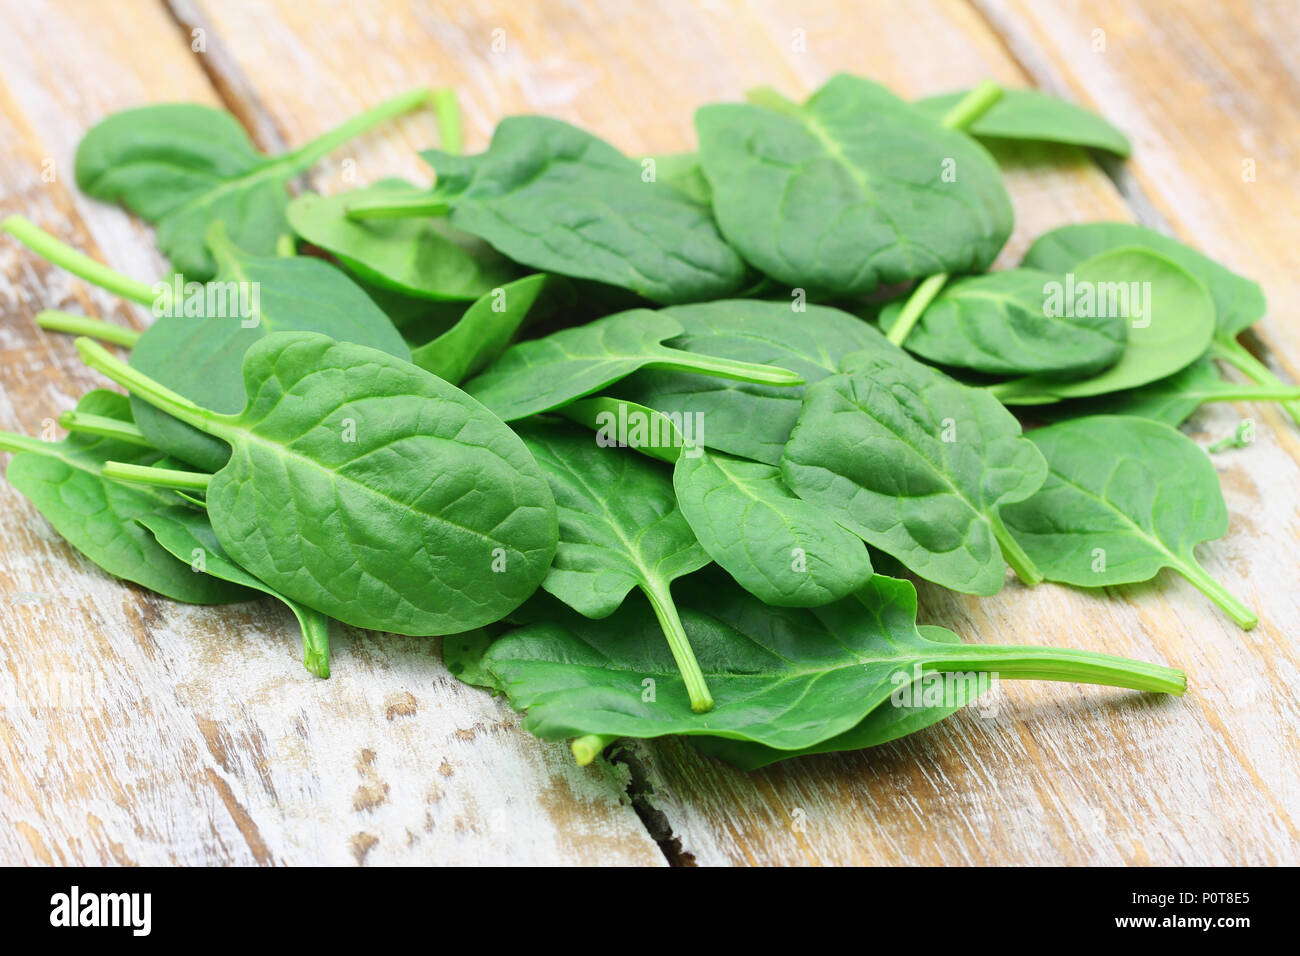 Stack of fresh baby spinach leaves on rustic wooden surface Stock Photo